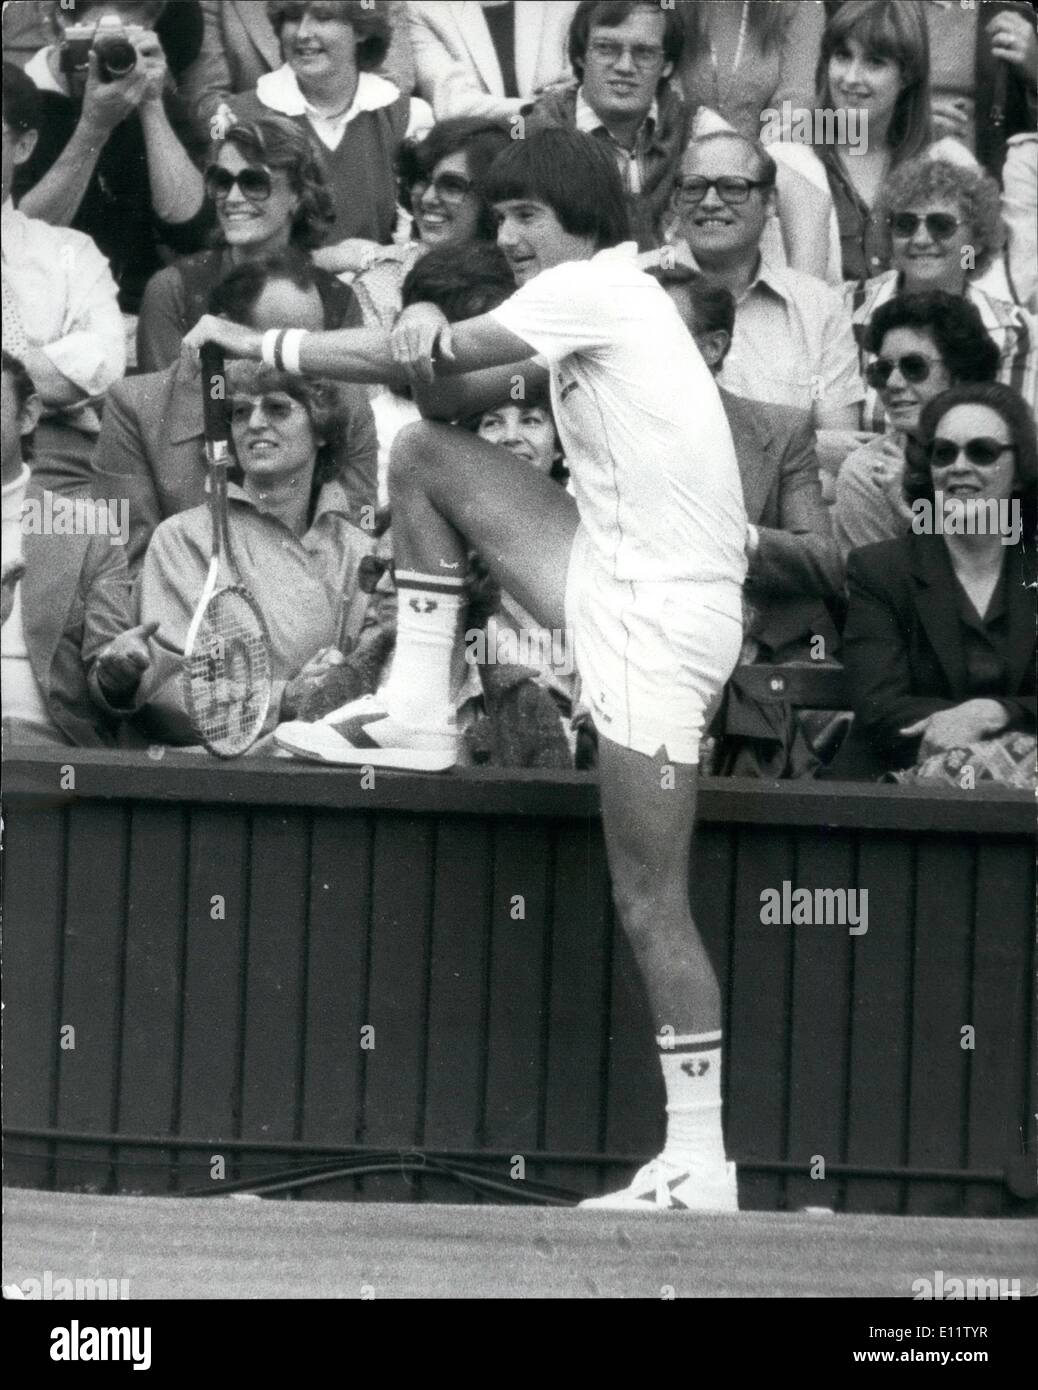 Jul. 07, 1980 - McEnroe Blows HIS tOP ''Superbrat'' John McEnroe was up to his old tricks during his semi-final match against Jimmer Conners on the centre court at Wimbledon today, when he got into an argument with the umpire over a disputed point. McEnroe won the match. Stock Photo